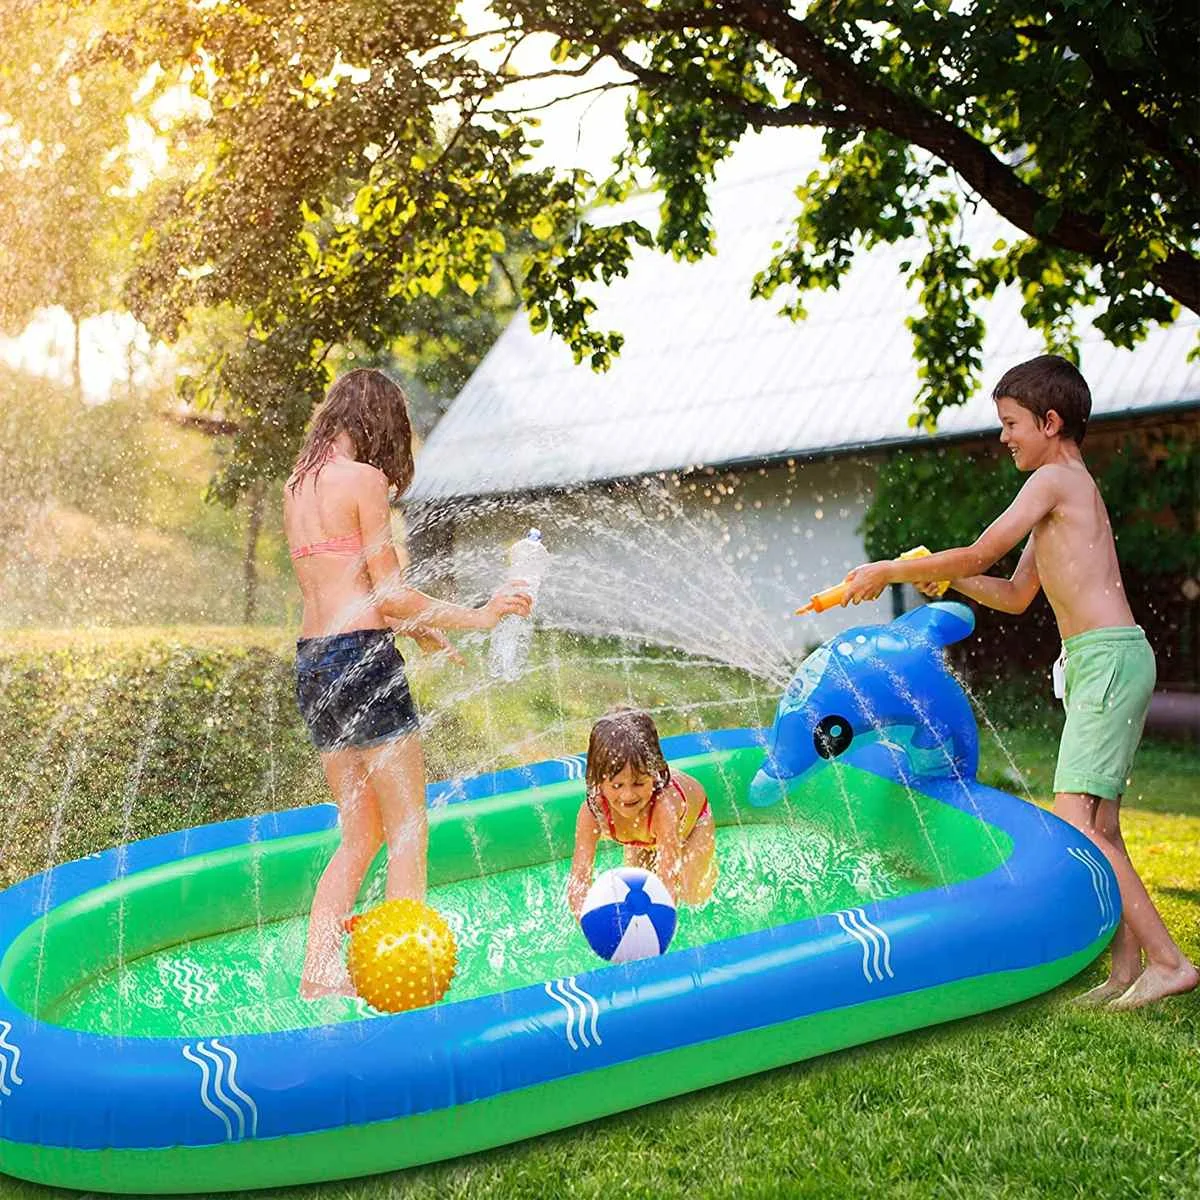 PADDLING GARDEN POOL TODDLER SMALL  KIDS FUN SWIMMING OUTDOOR BABY INFLATABLE 